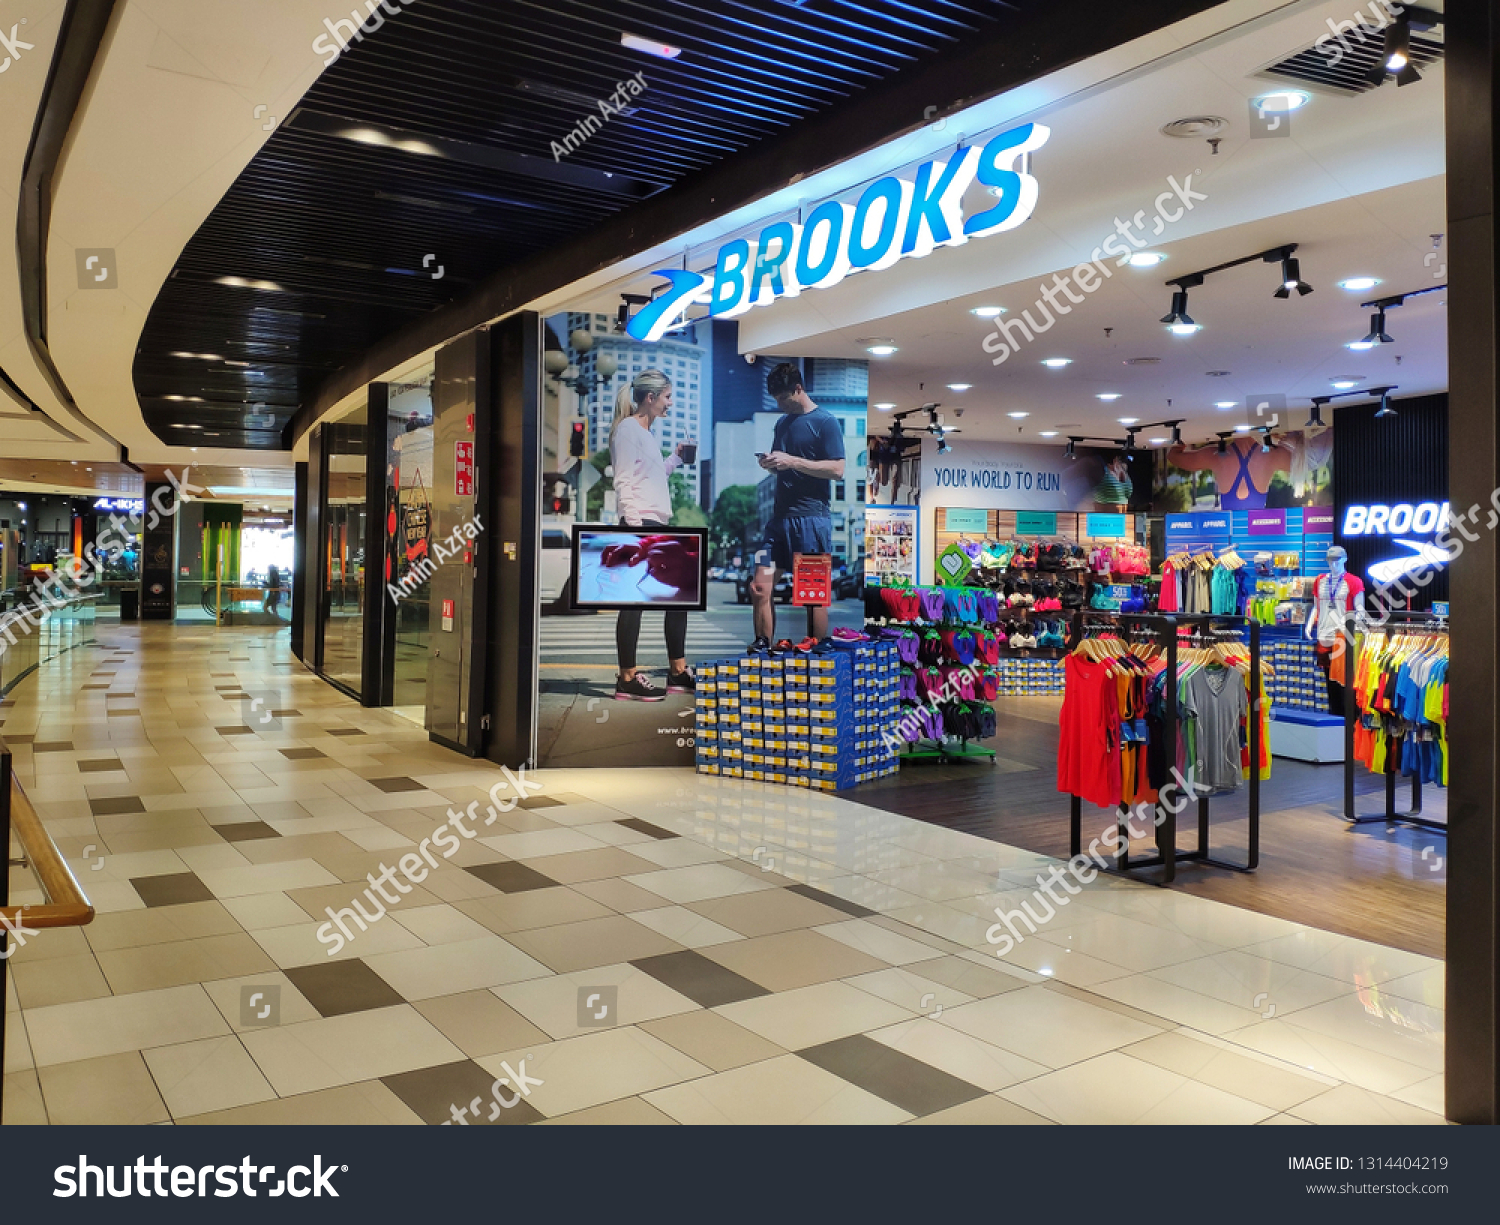 brooks shoes retailers